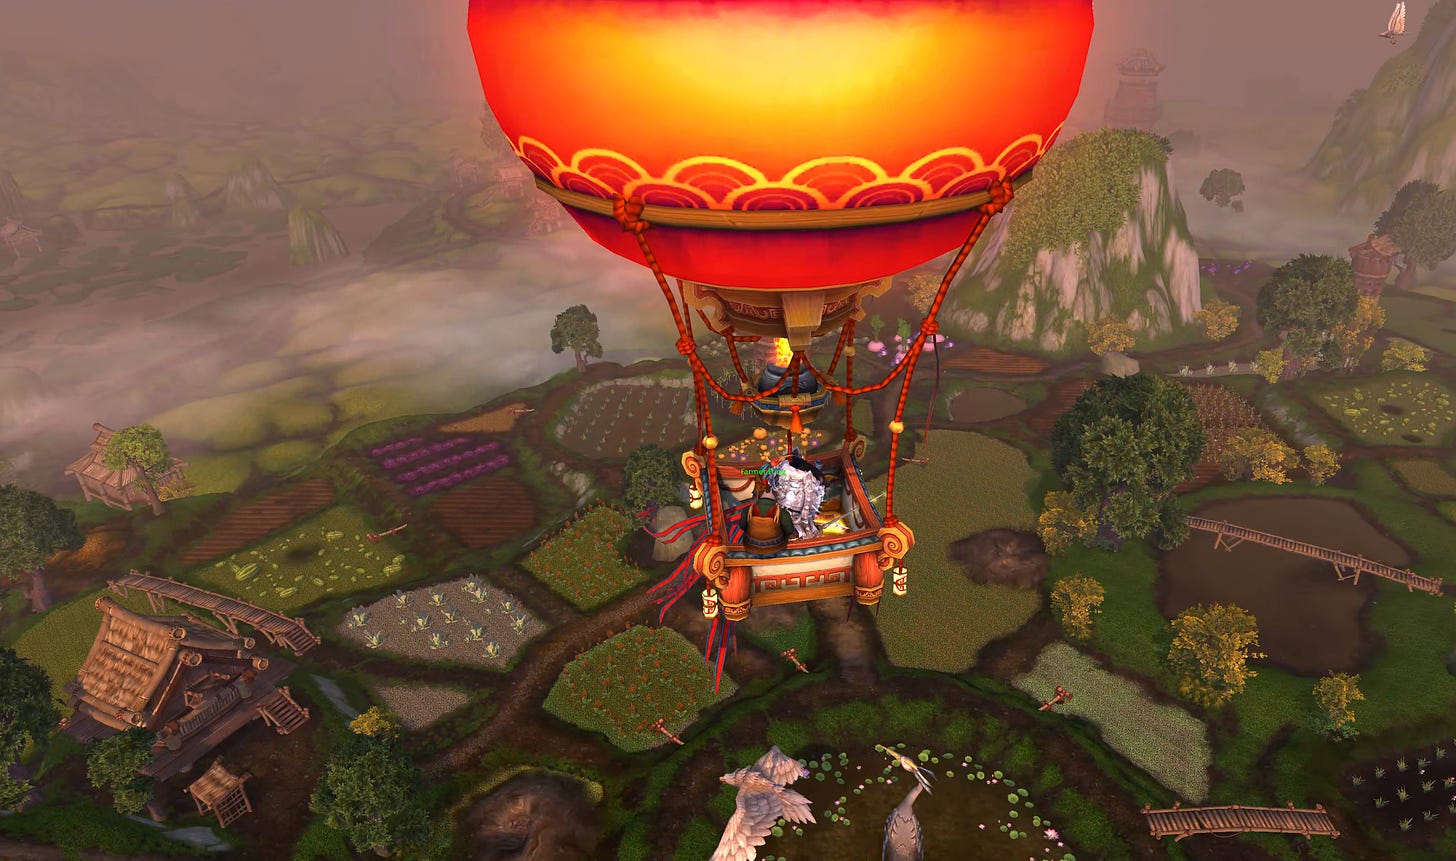 A bunch of players in a hot air balloon over a bunch of farmland with various crops.